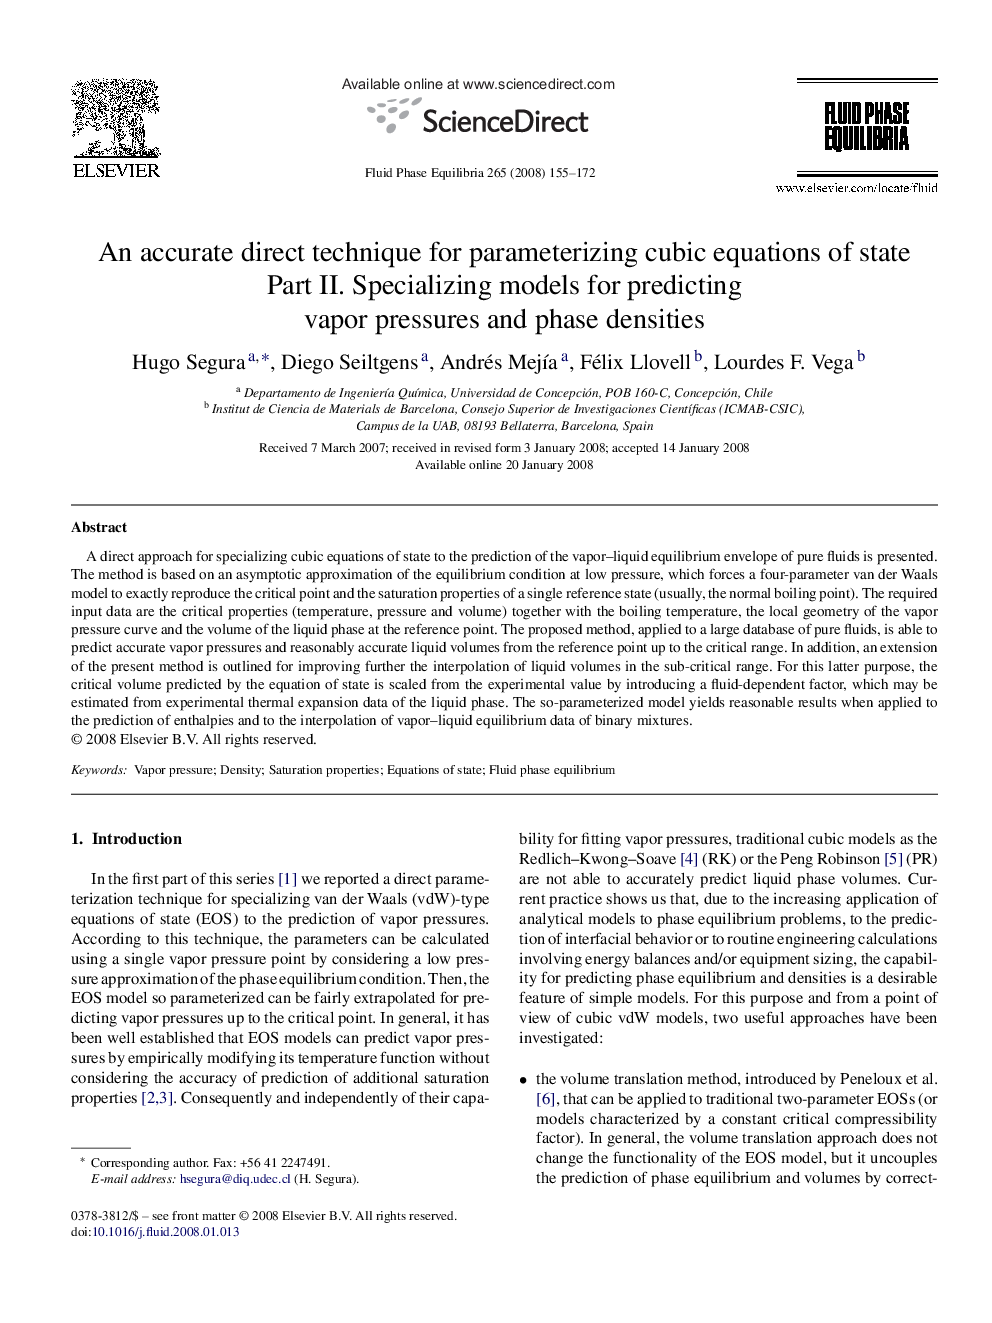 An accurate direct technique for parameterizing cubic equations of state: Part II. Specializing models for predicting vapor pressures and phase densities